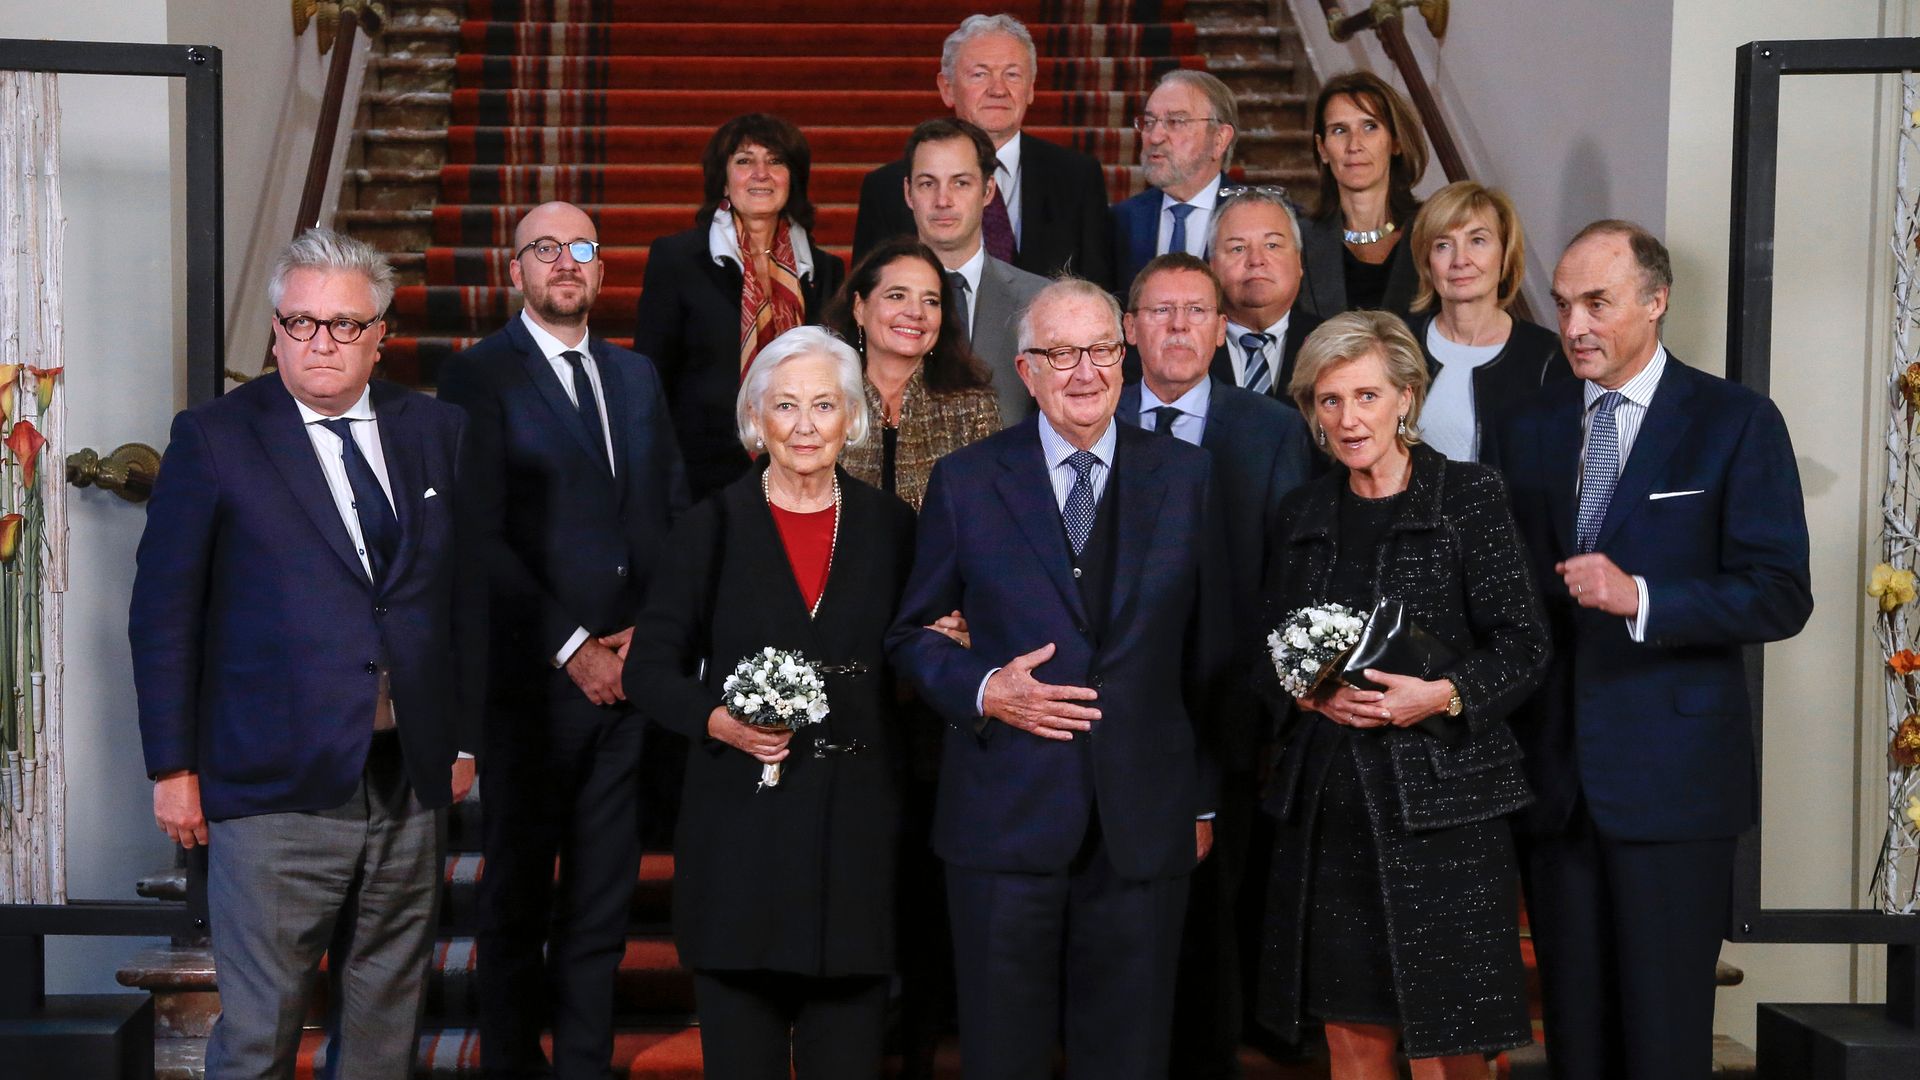 King Albert II stood with Queen Paola, Princess Astrid, Prince Laurent and members of the Belgian government